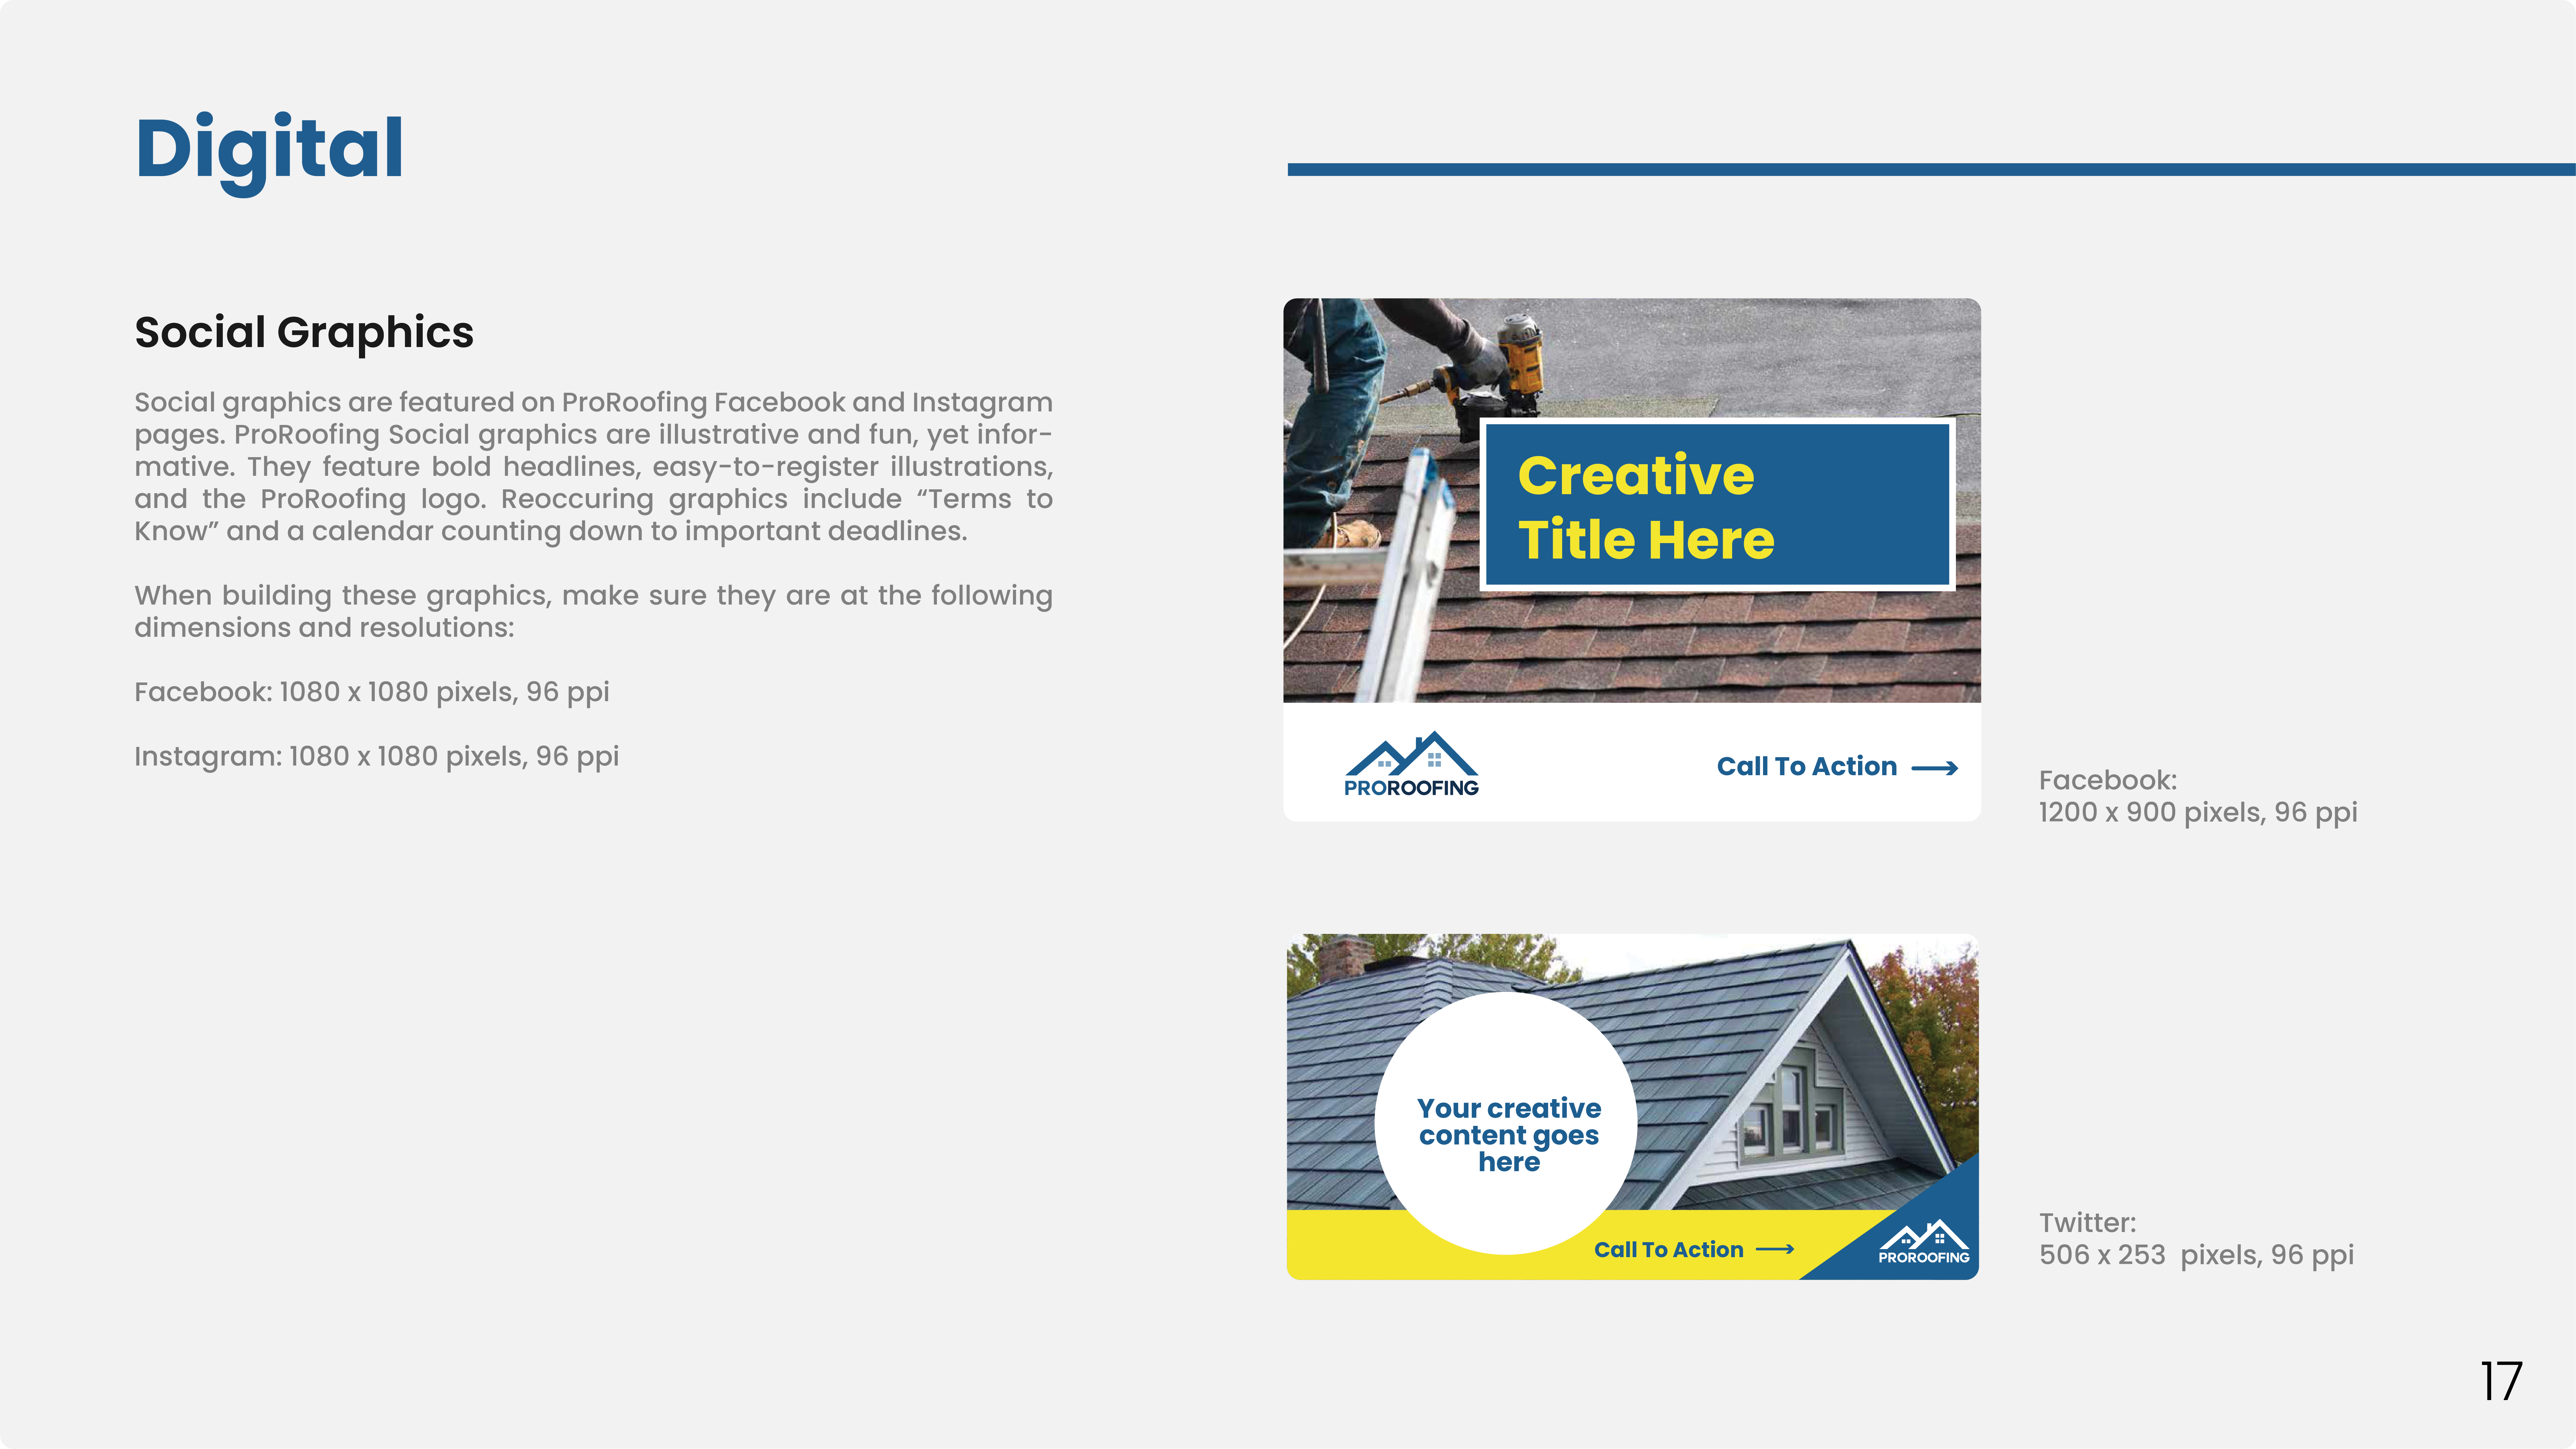 Pro Roofing - Pro roofing Brand Guidelines 19 - New Minds Group